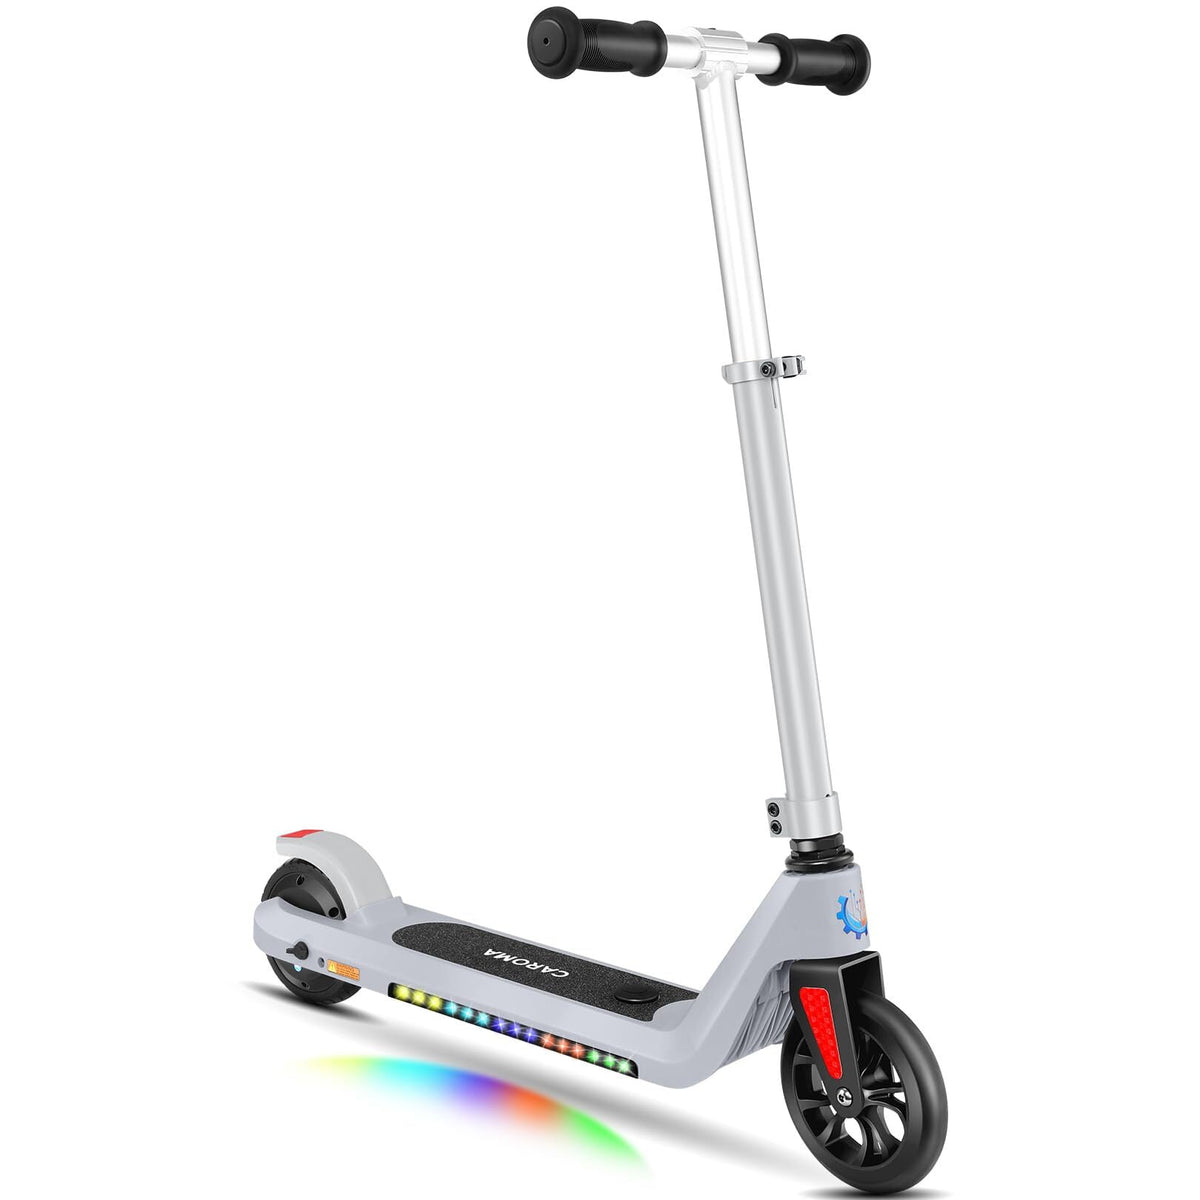 Caroma 22V Electric Scooter for Kids Ages 6-12, Powered E-Scooter with Speeds of 6 MPH, 5" Solid Rubber Wheels UL2272 Certification, Lightweight Electric Kick Scooter for Kids Boy Girl Silver